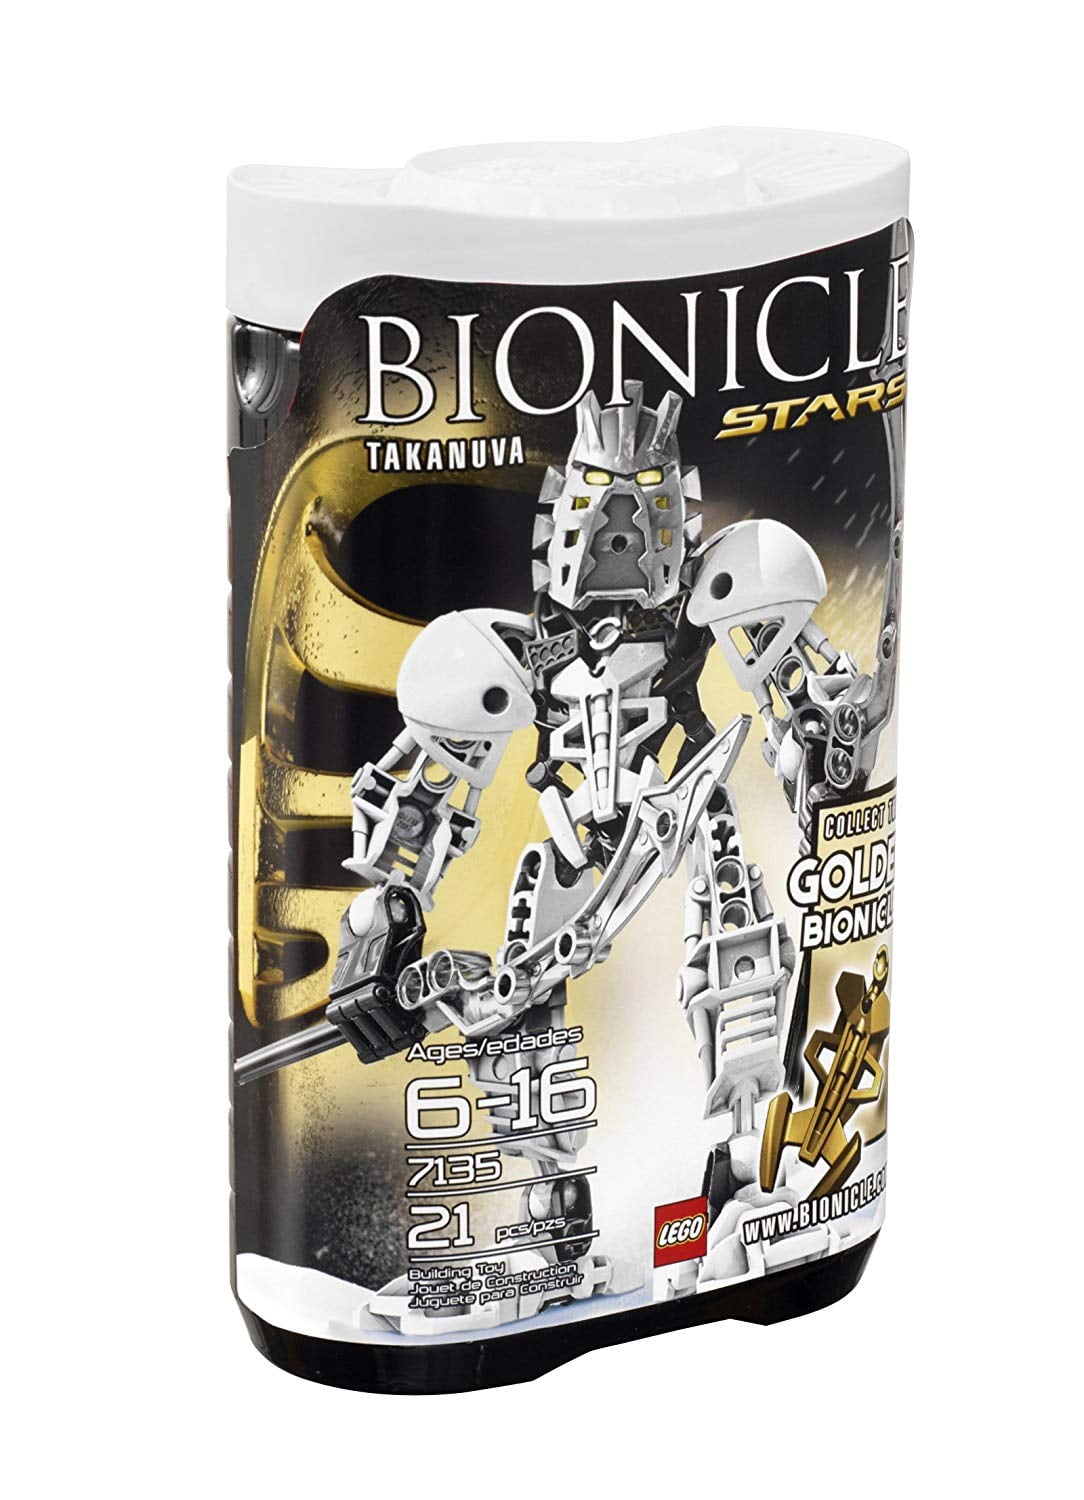 NEW & SEALED 7136 Lego GOLDEN BIONICLE COLLECTION  Skrall 